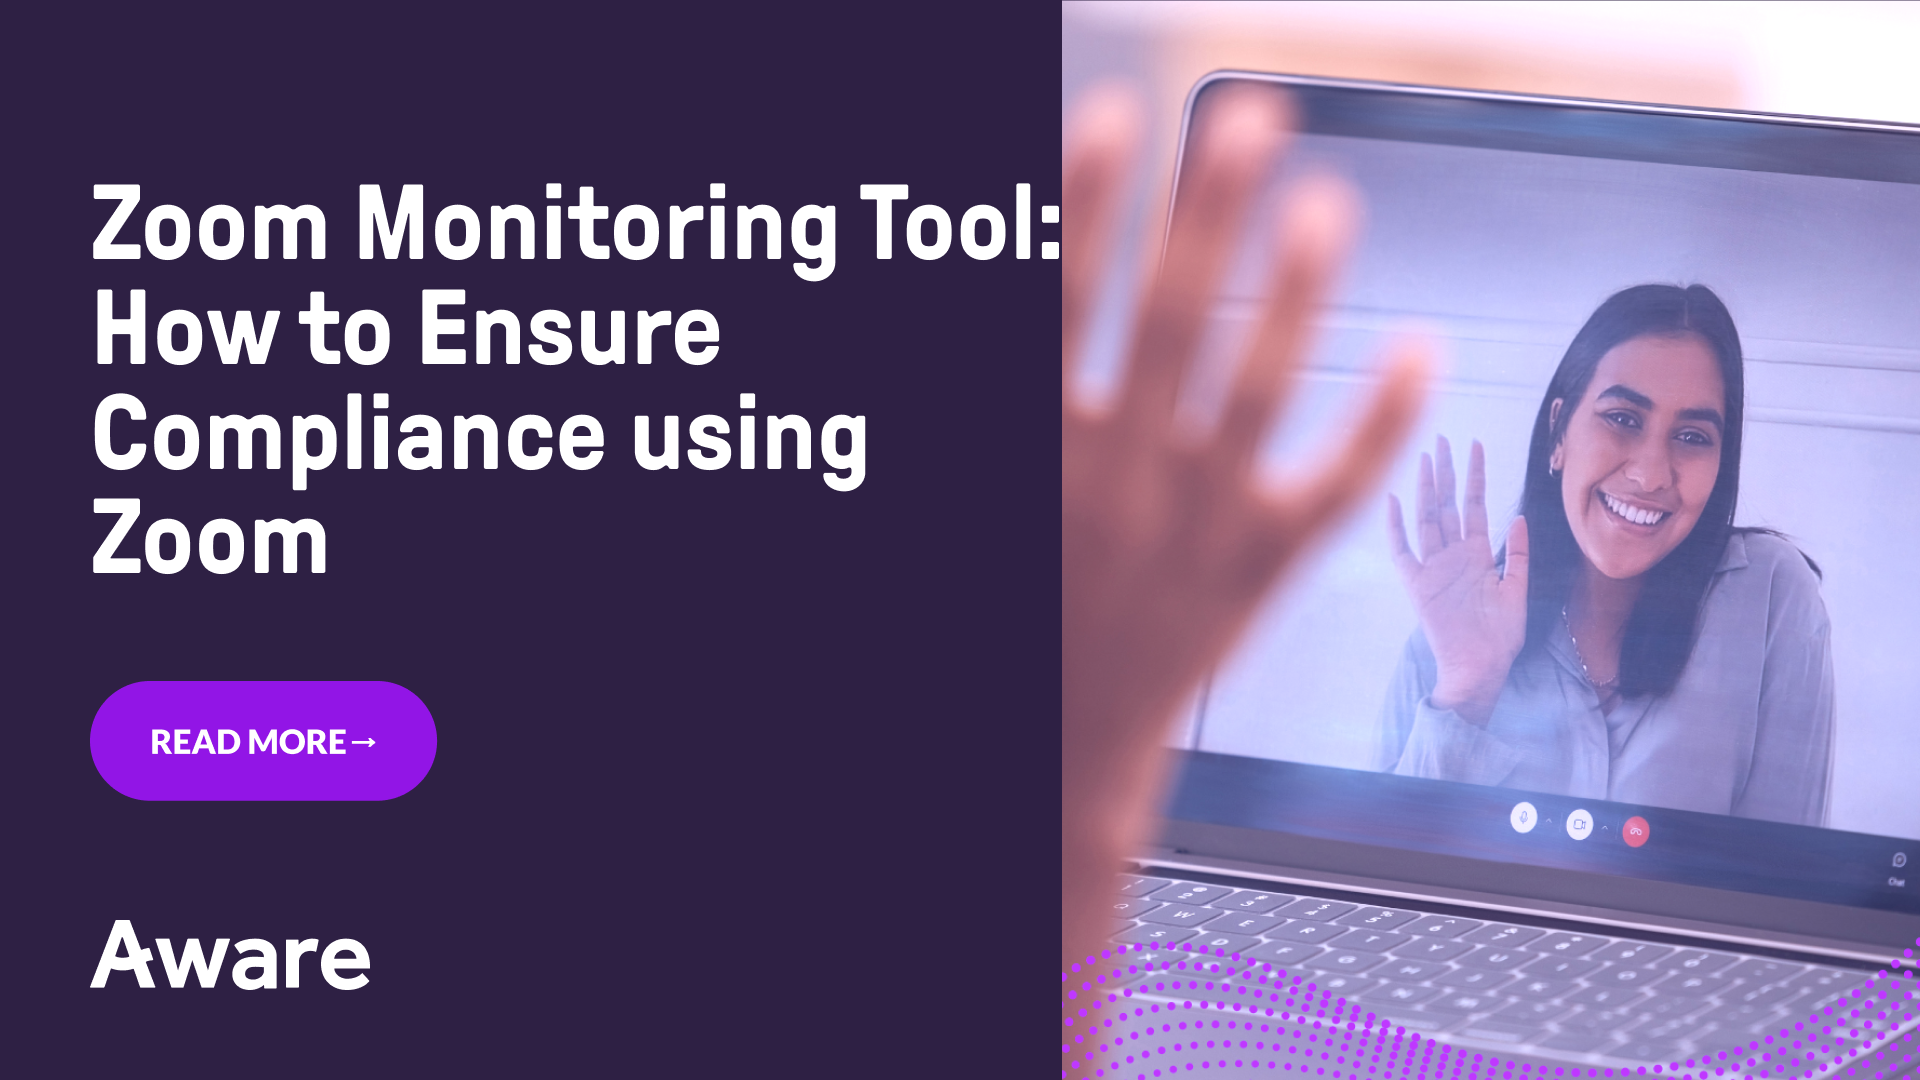 Zoom Monitoring Tool: How to Ensure Compliance Using Zoom